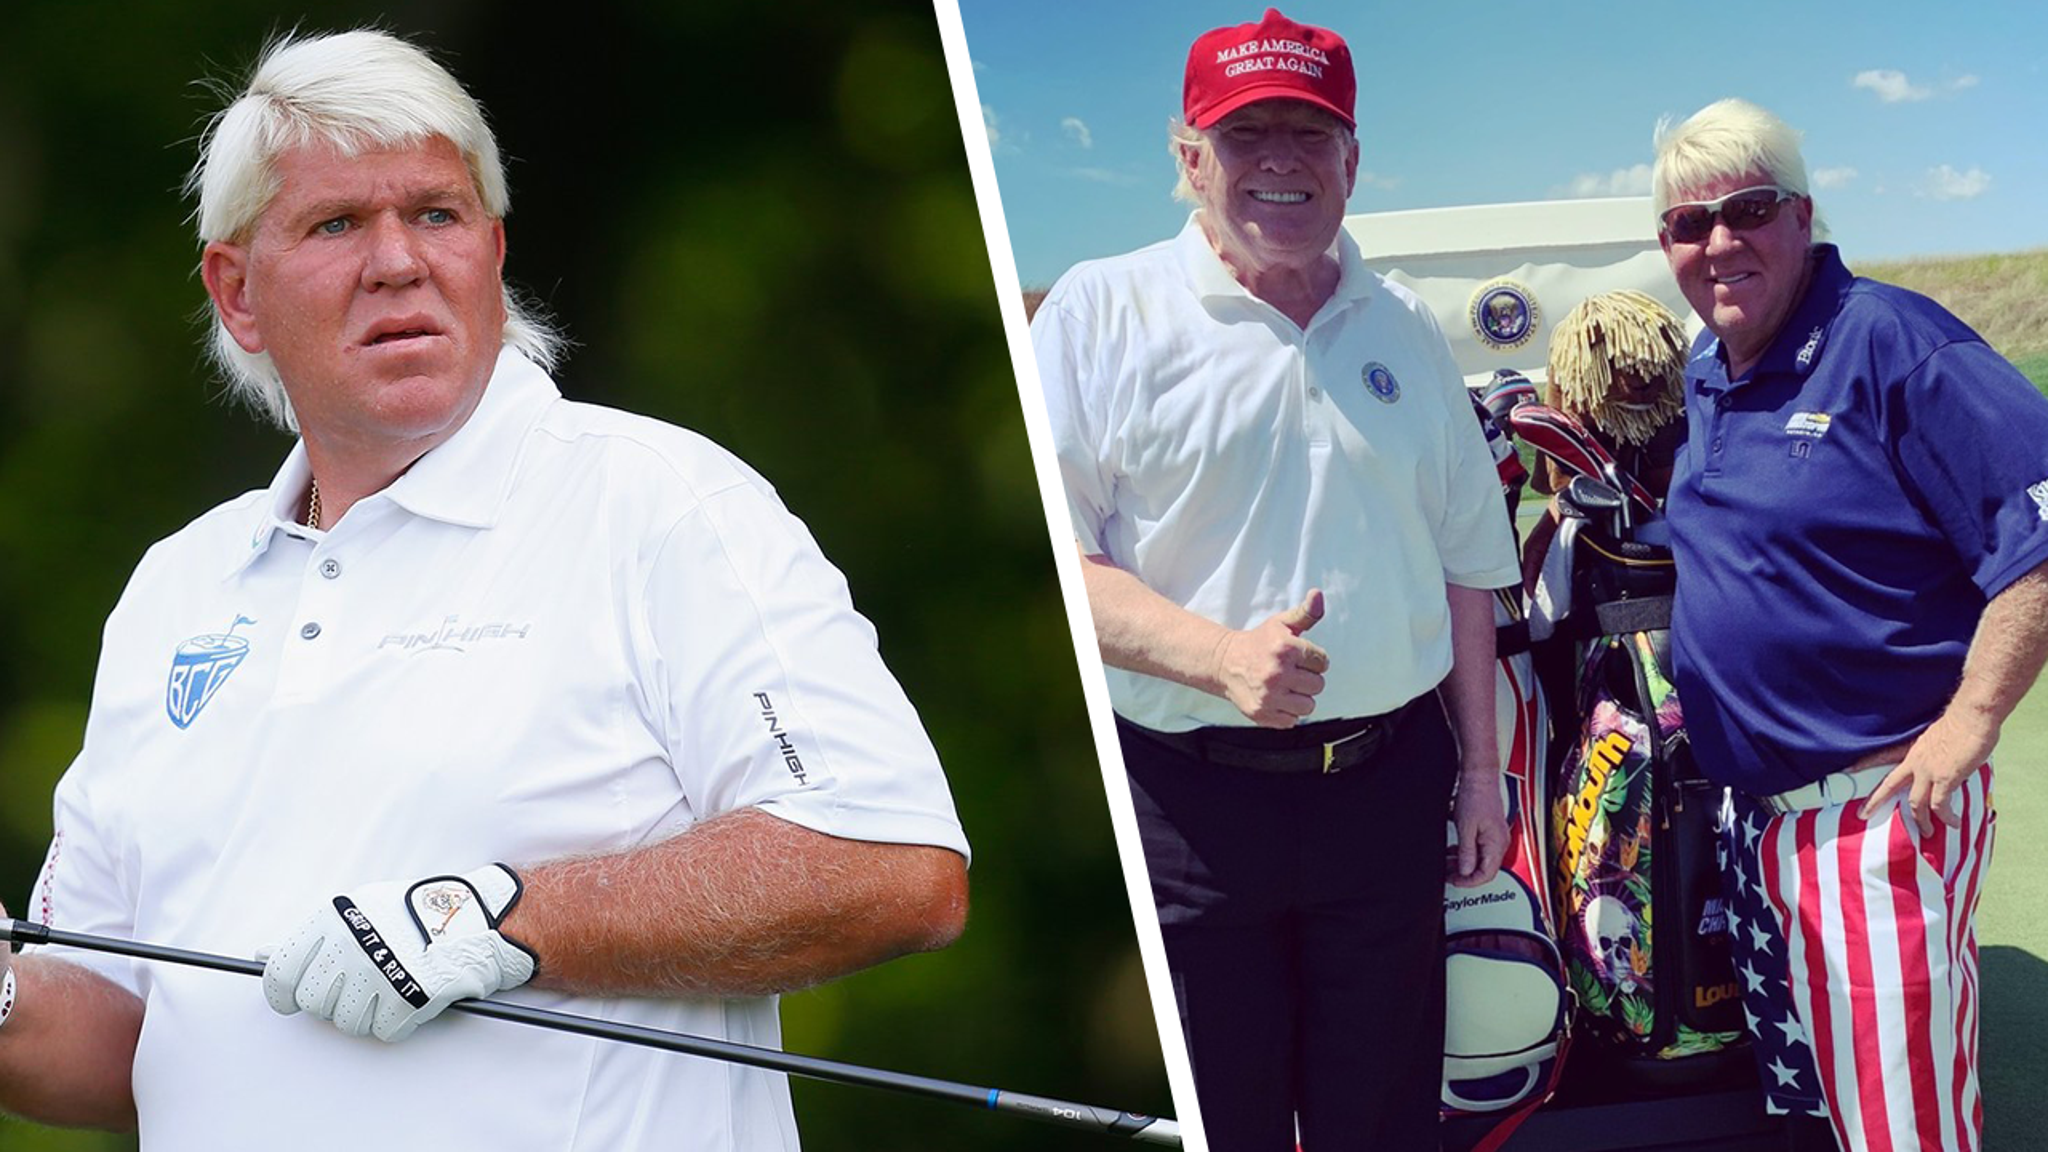 President Trump Praises John Daly After Golf Outing, 'A Special Guy'